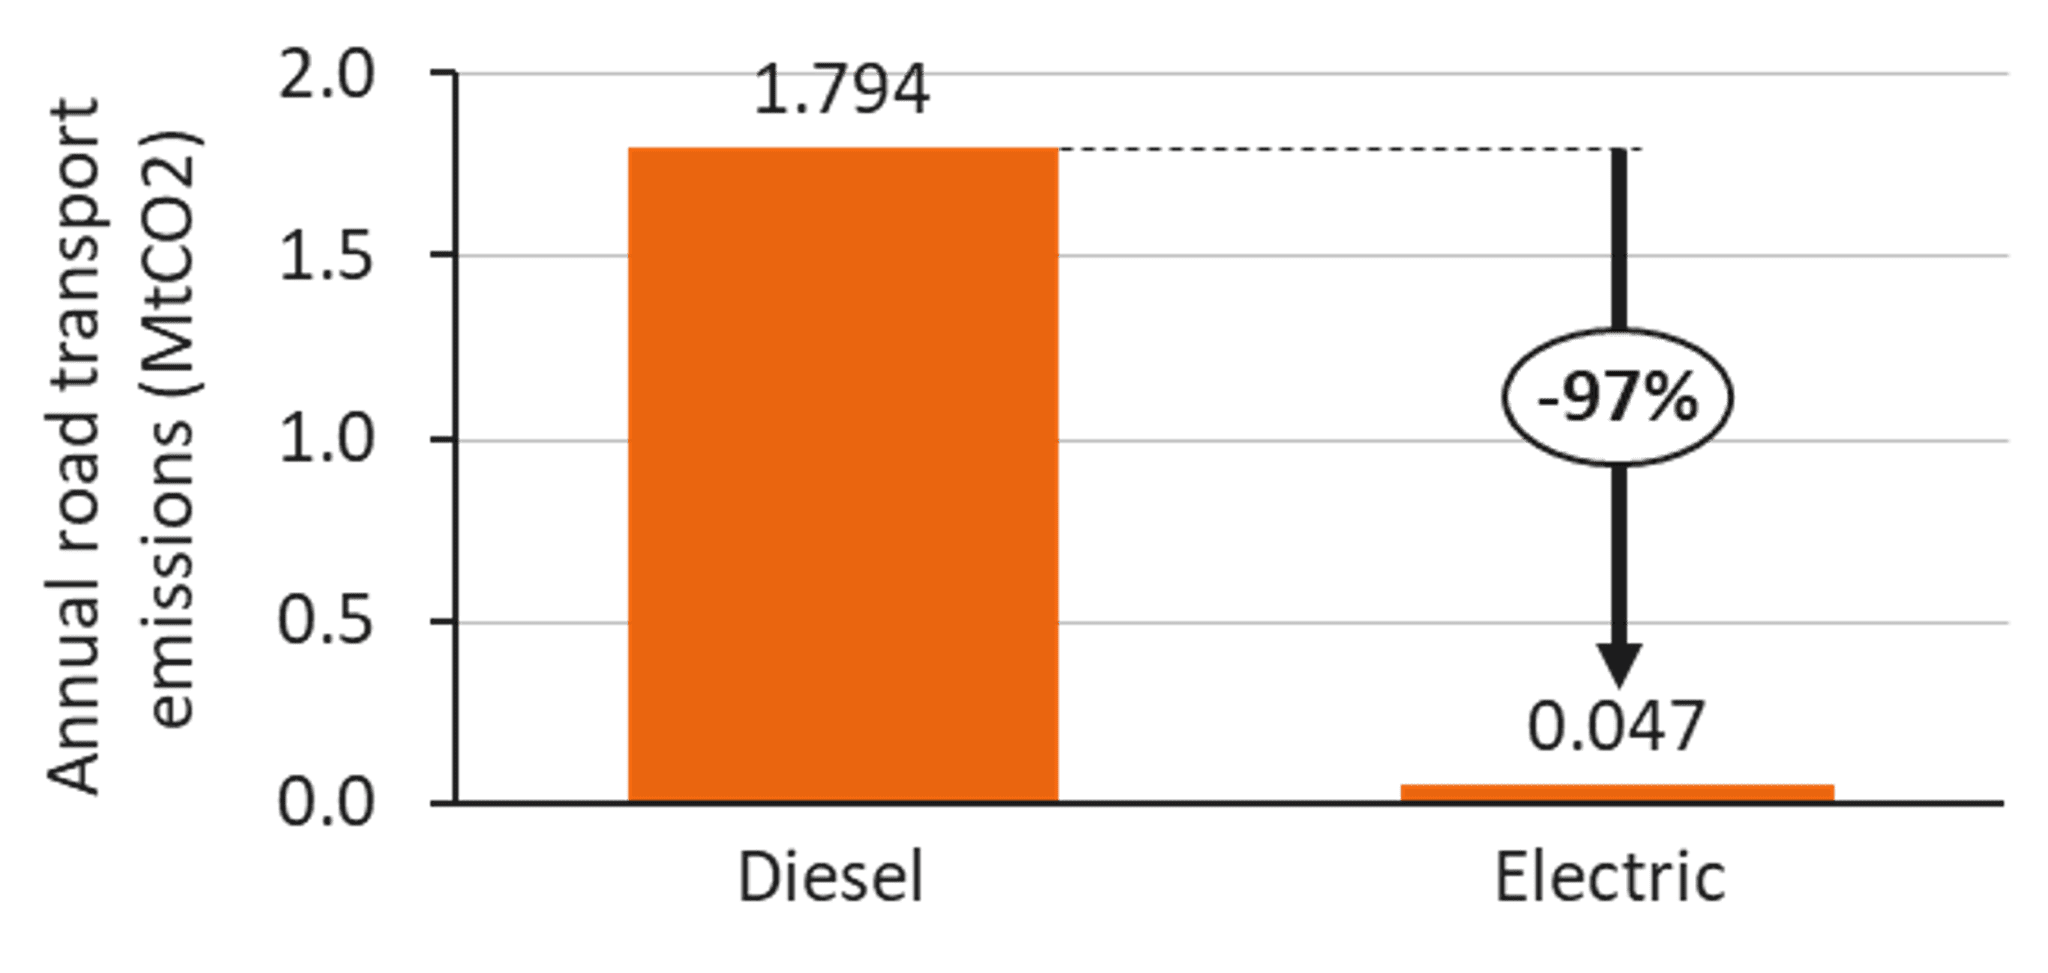 A bar chart (orange bars) shows the annual carbon emissions reduction for electrification of LGVs. The annual carbon dioxide emissions for a fully diesel fleet is 1.794 mega-tonnes of carbon dioxide and the annual carbon dioxide emissions for a fully electrified fleet is 0.047 mega-tonnes of carbon dioxide. 